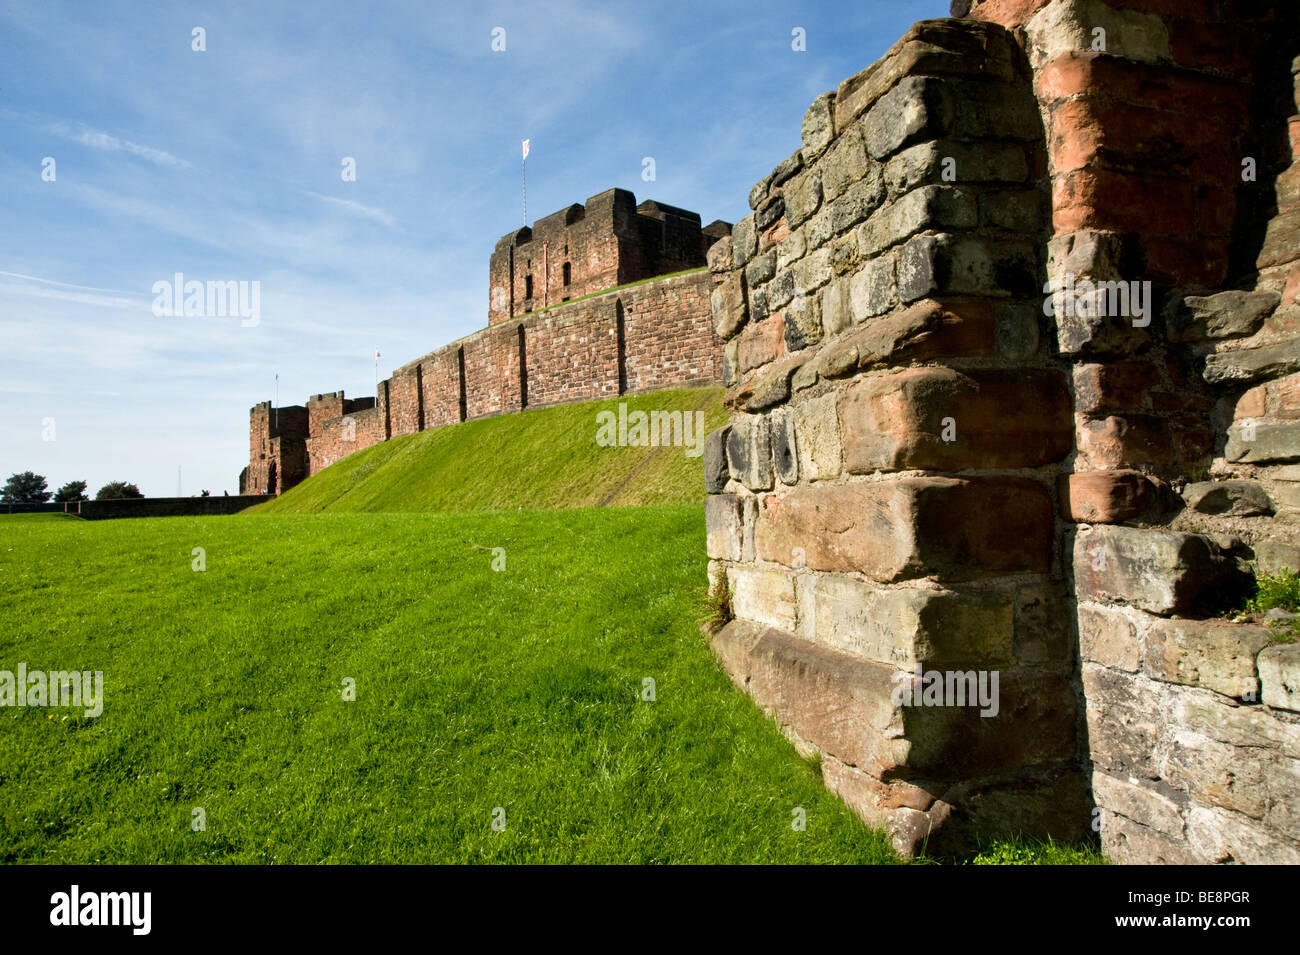 Looking along the wall of Carlisle Castle, Medieval Fortress, Cumbria, England, UK Stock Photo